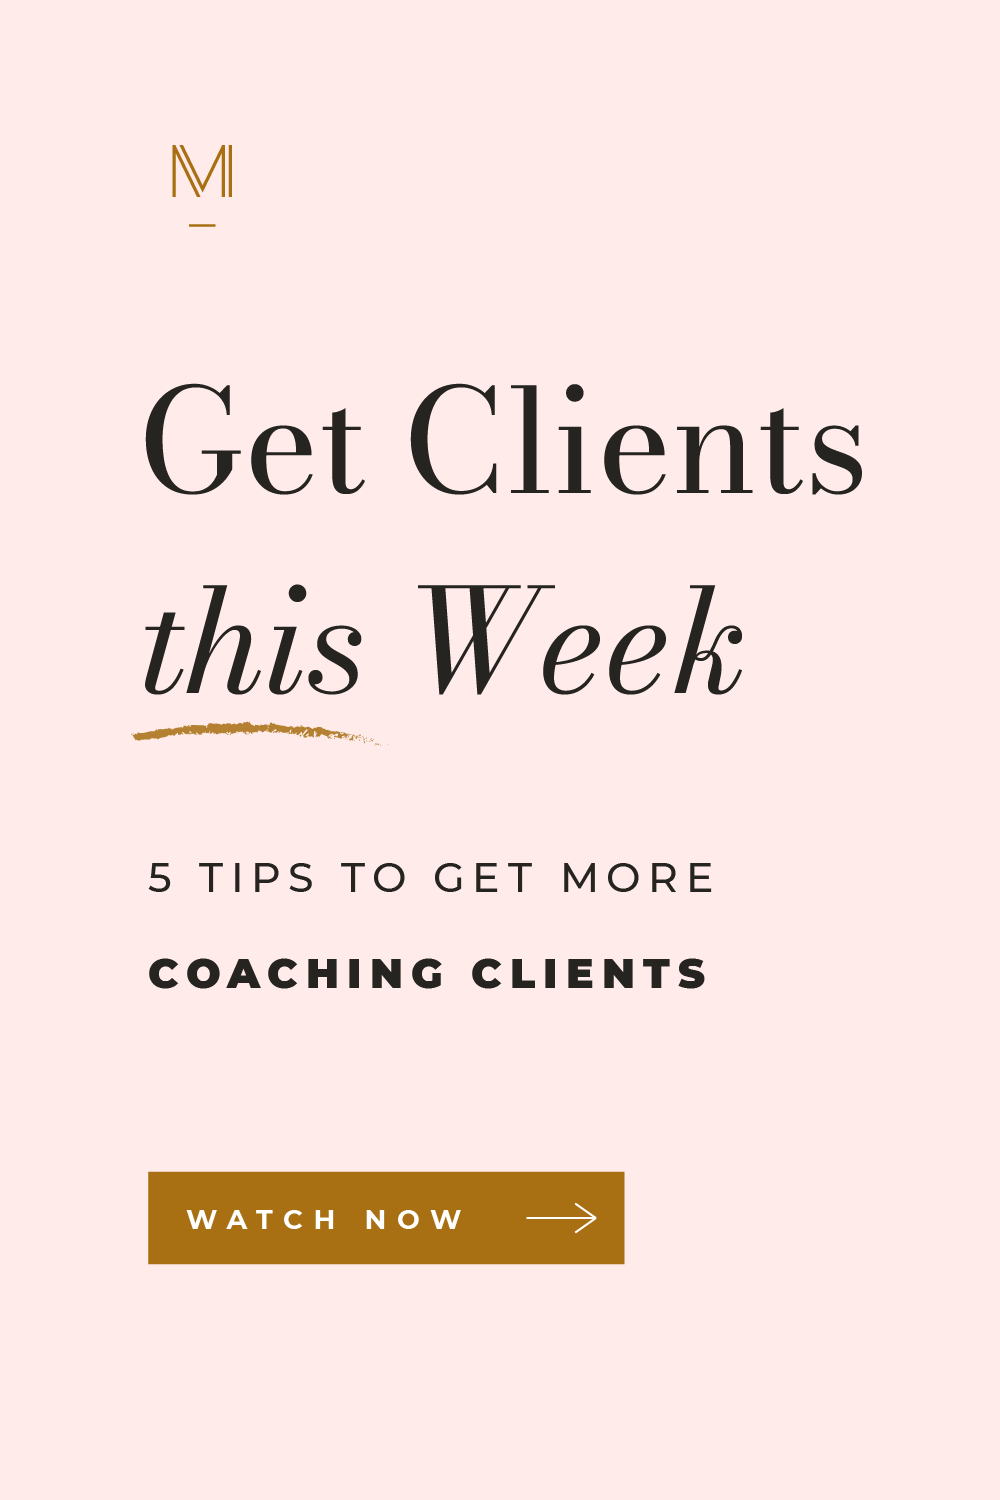 Need to get coaching clients FAST? Then this blog post is for you! You’ll learn my best tips for marketing for coaches—so you can get more coaching clients SOONER rather than later. #luxurybrand #lifecoach #lifecoaching #marketingtips